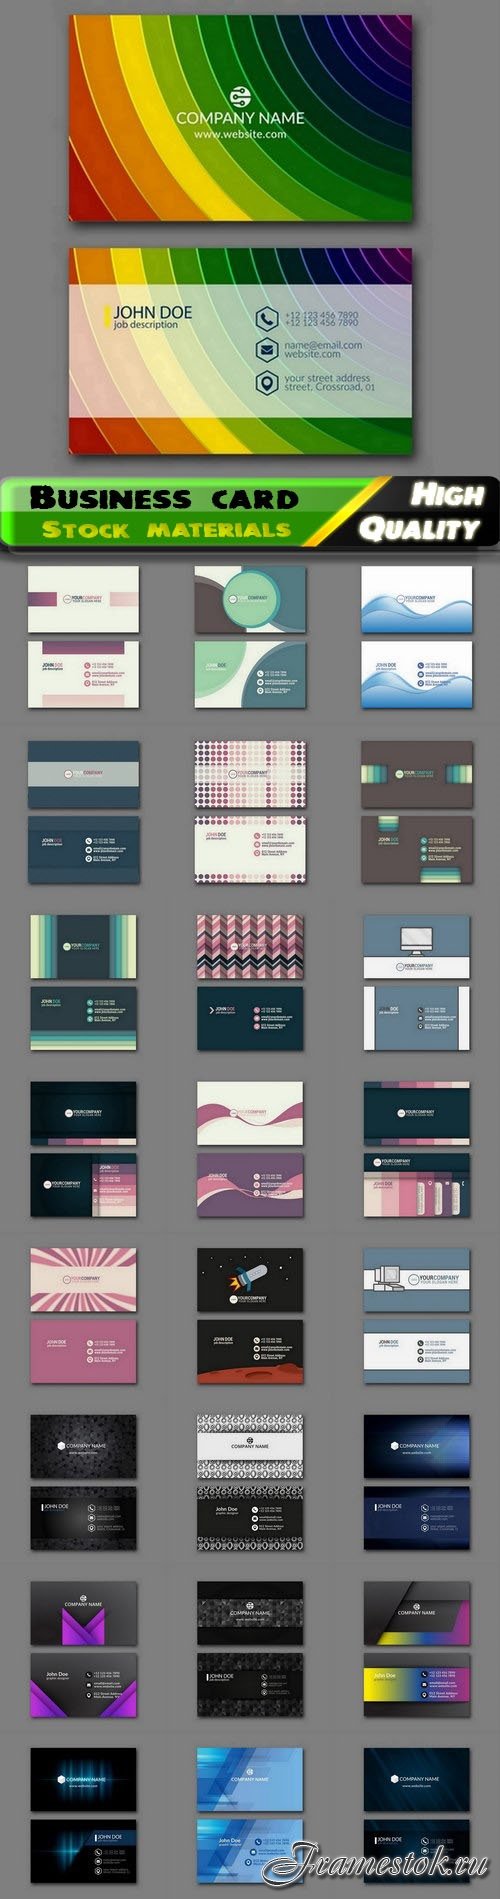 Simple business card layout and corporate stationery design 25 Eps